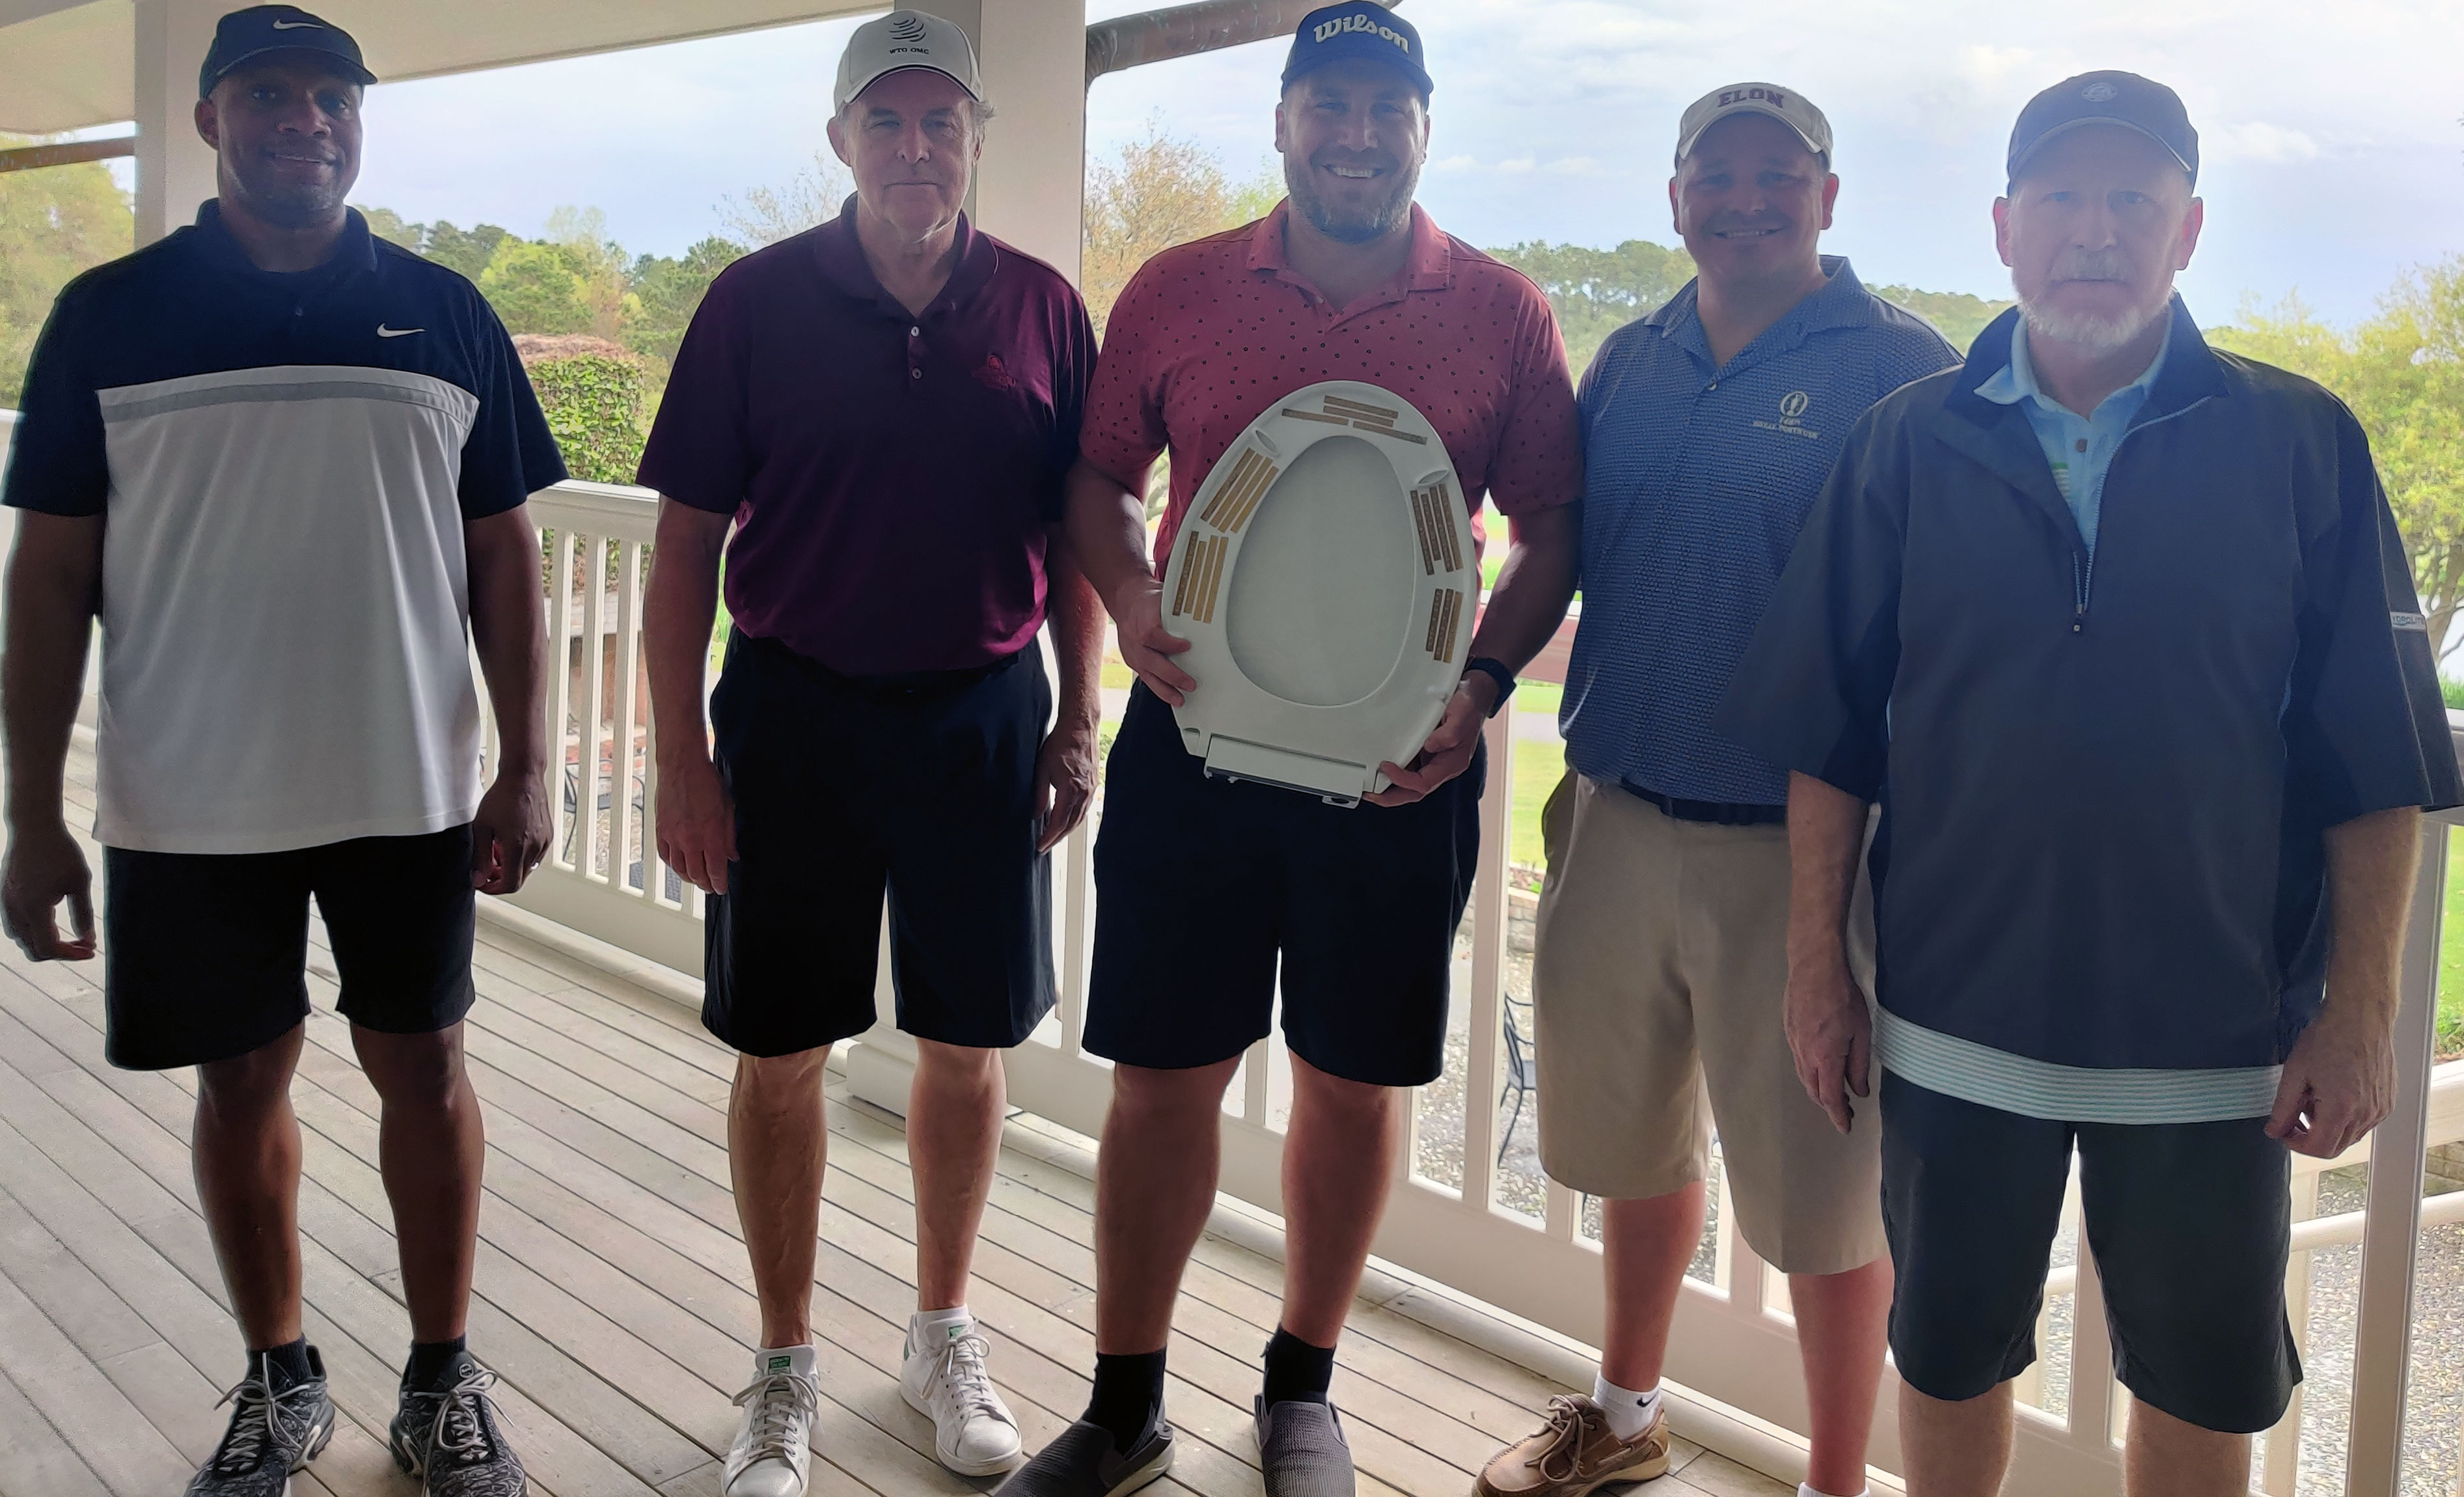 Scott Ward holding his Kohler Trophy pictured with the other four players who managed to make it to the final round on Sunday at The Dye Club.